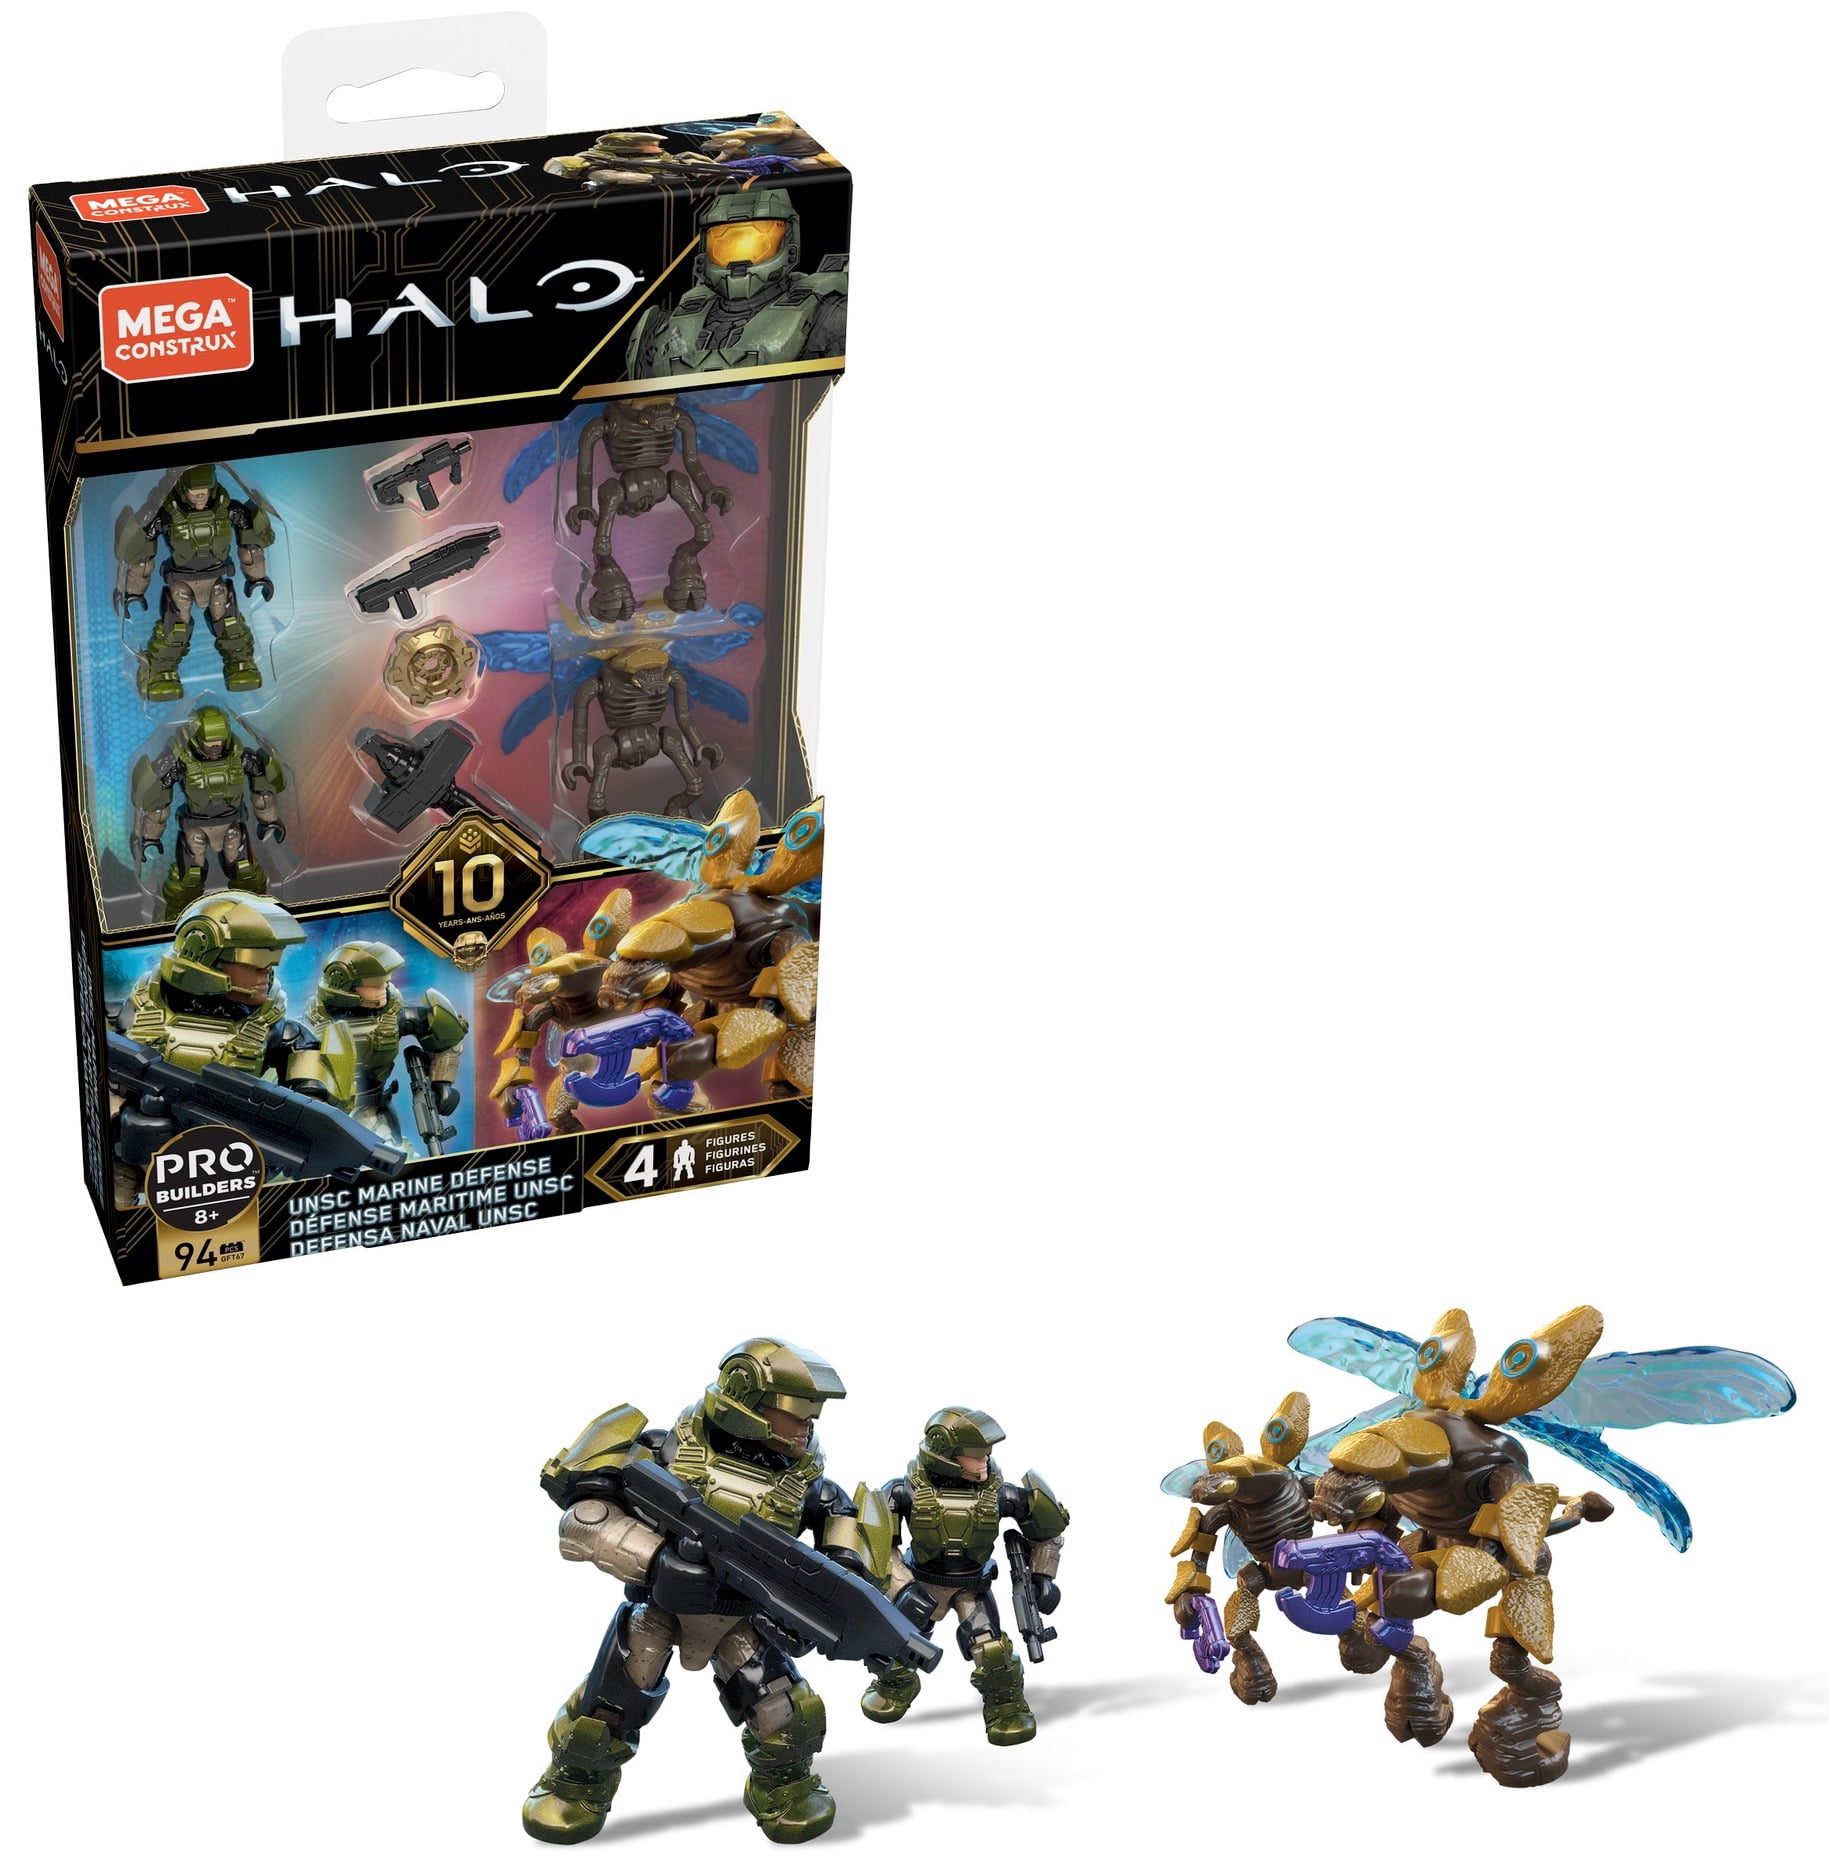 Battle for the Ark SPIRIT OF FIRE new in package Mega Construx Halo 